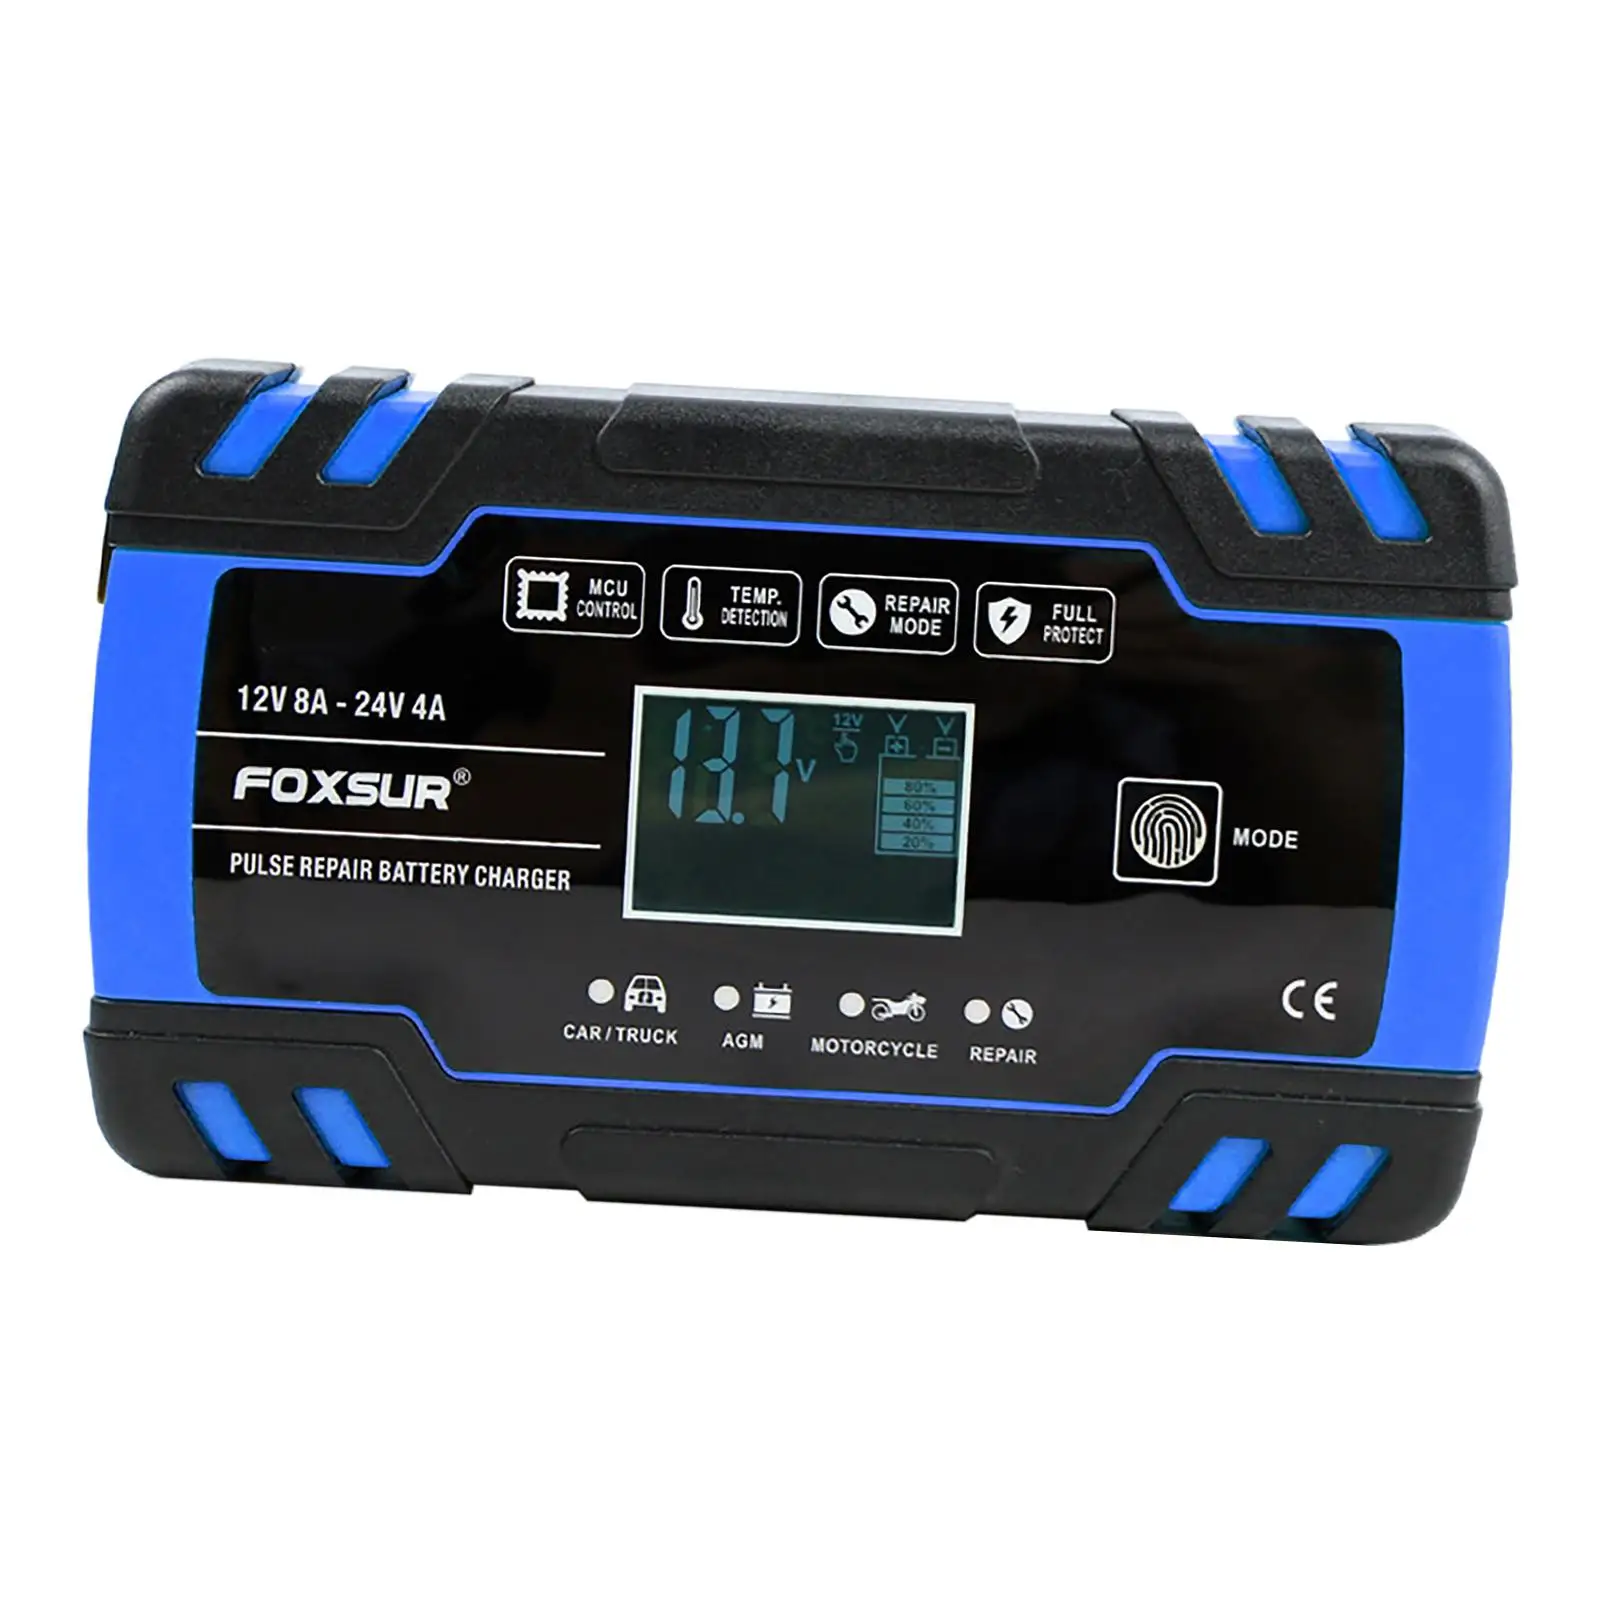 Automatic Car Battery Charger 12V/8A 24V/4A with LCD Display 3-Stage PULSE Repair Charger for Car RV Truck Lawn Mower